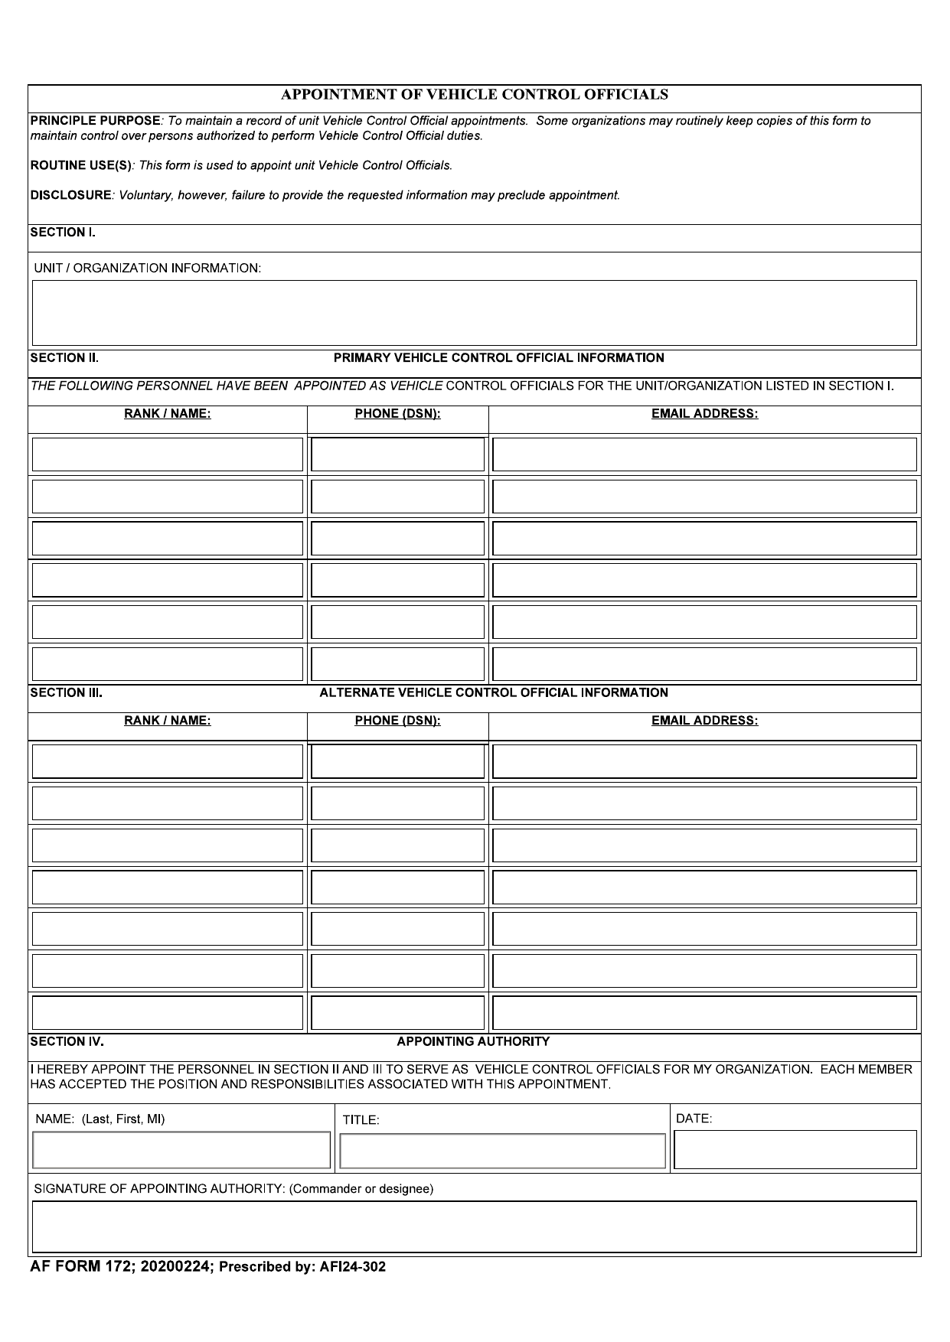 AF Form 172 Appointment of Vehicle Control Officials, Page 1